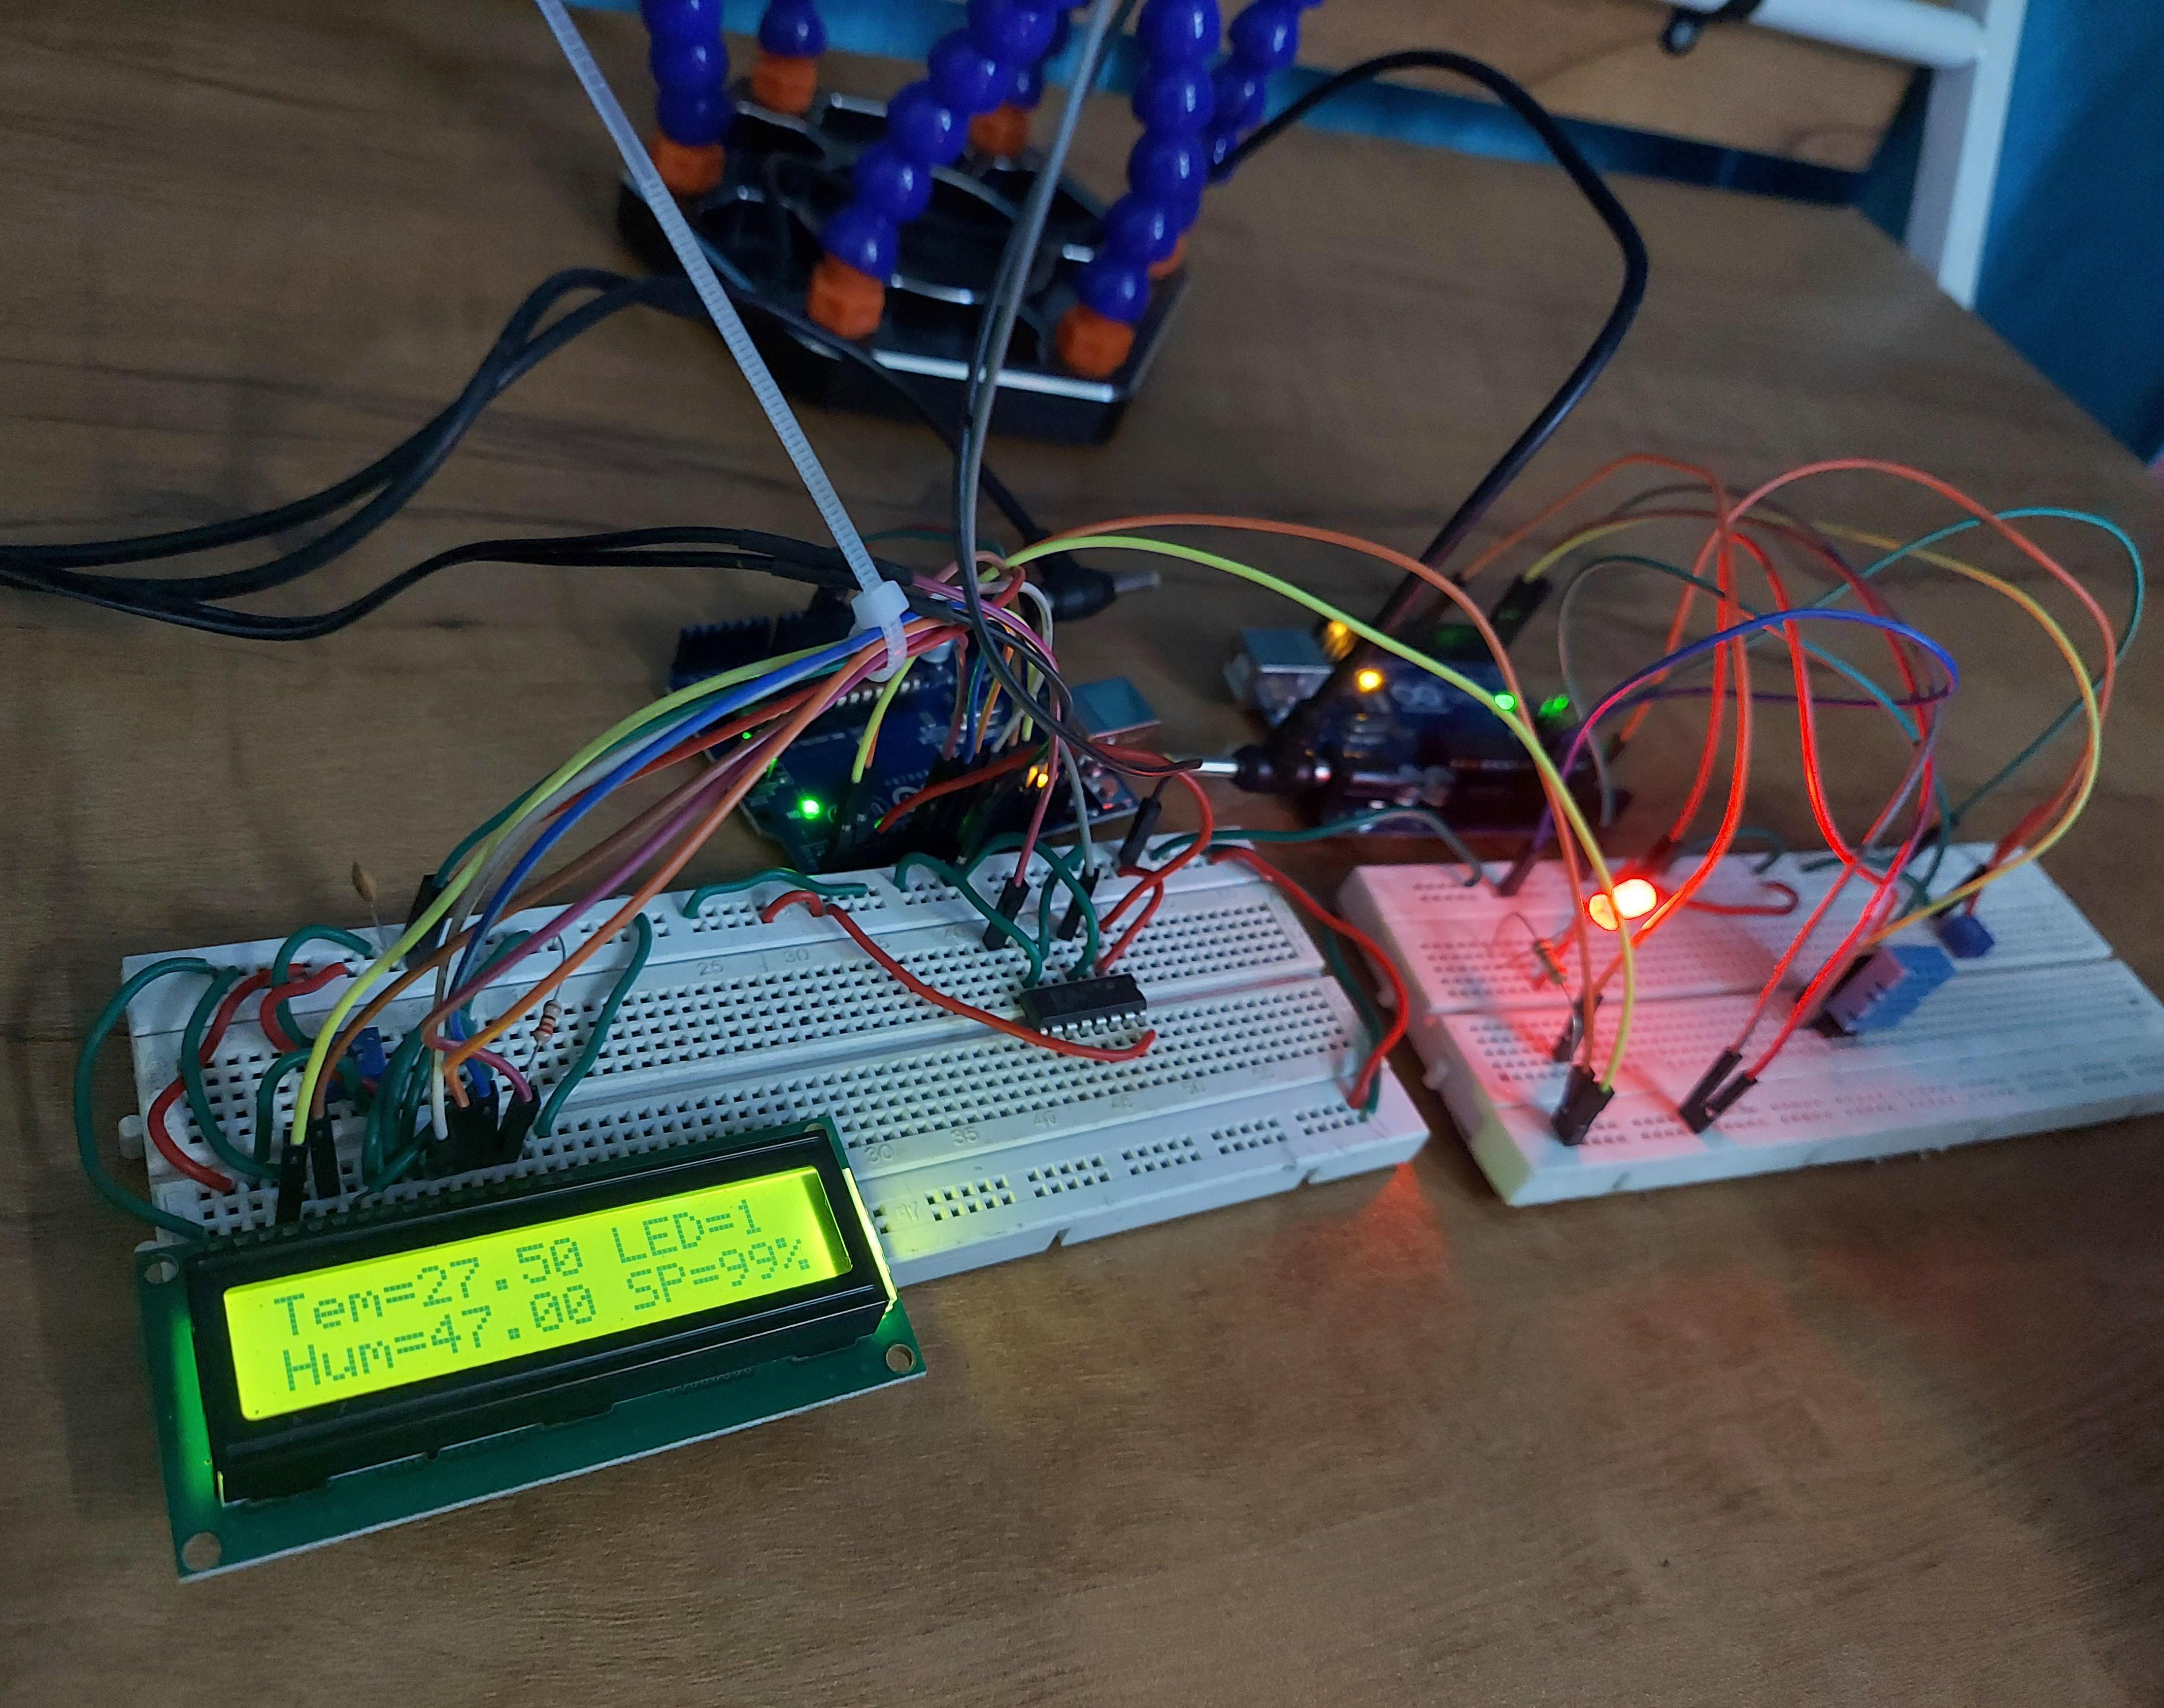 Master-Slave Communication Between Two Arduino Uno Boards